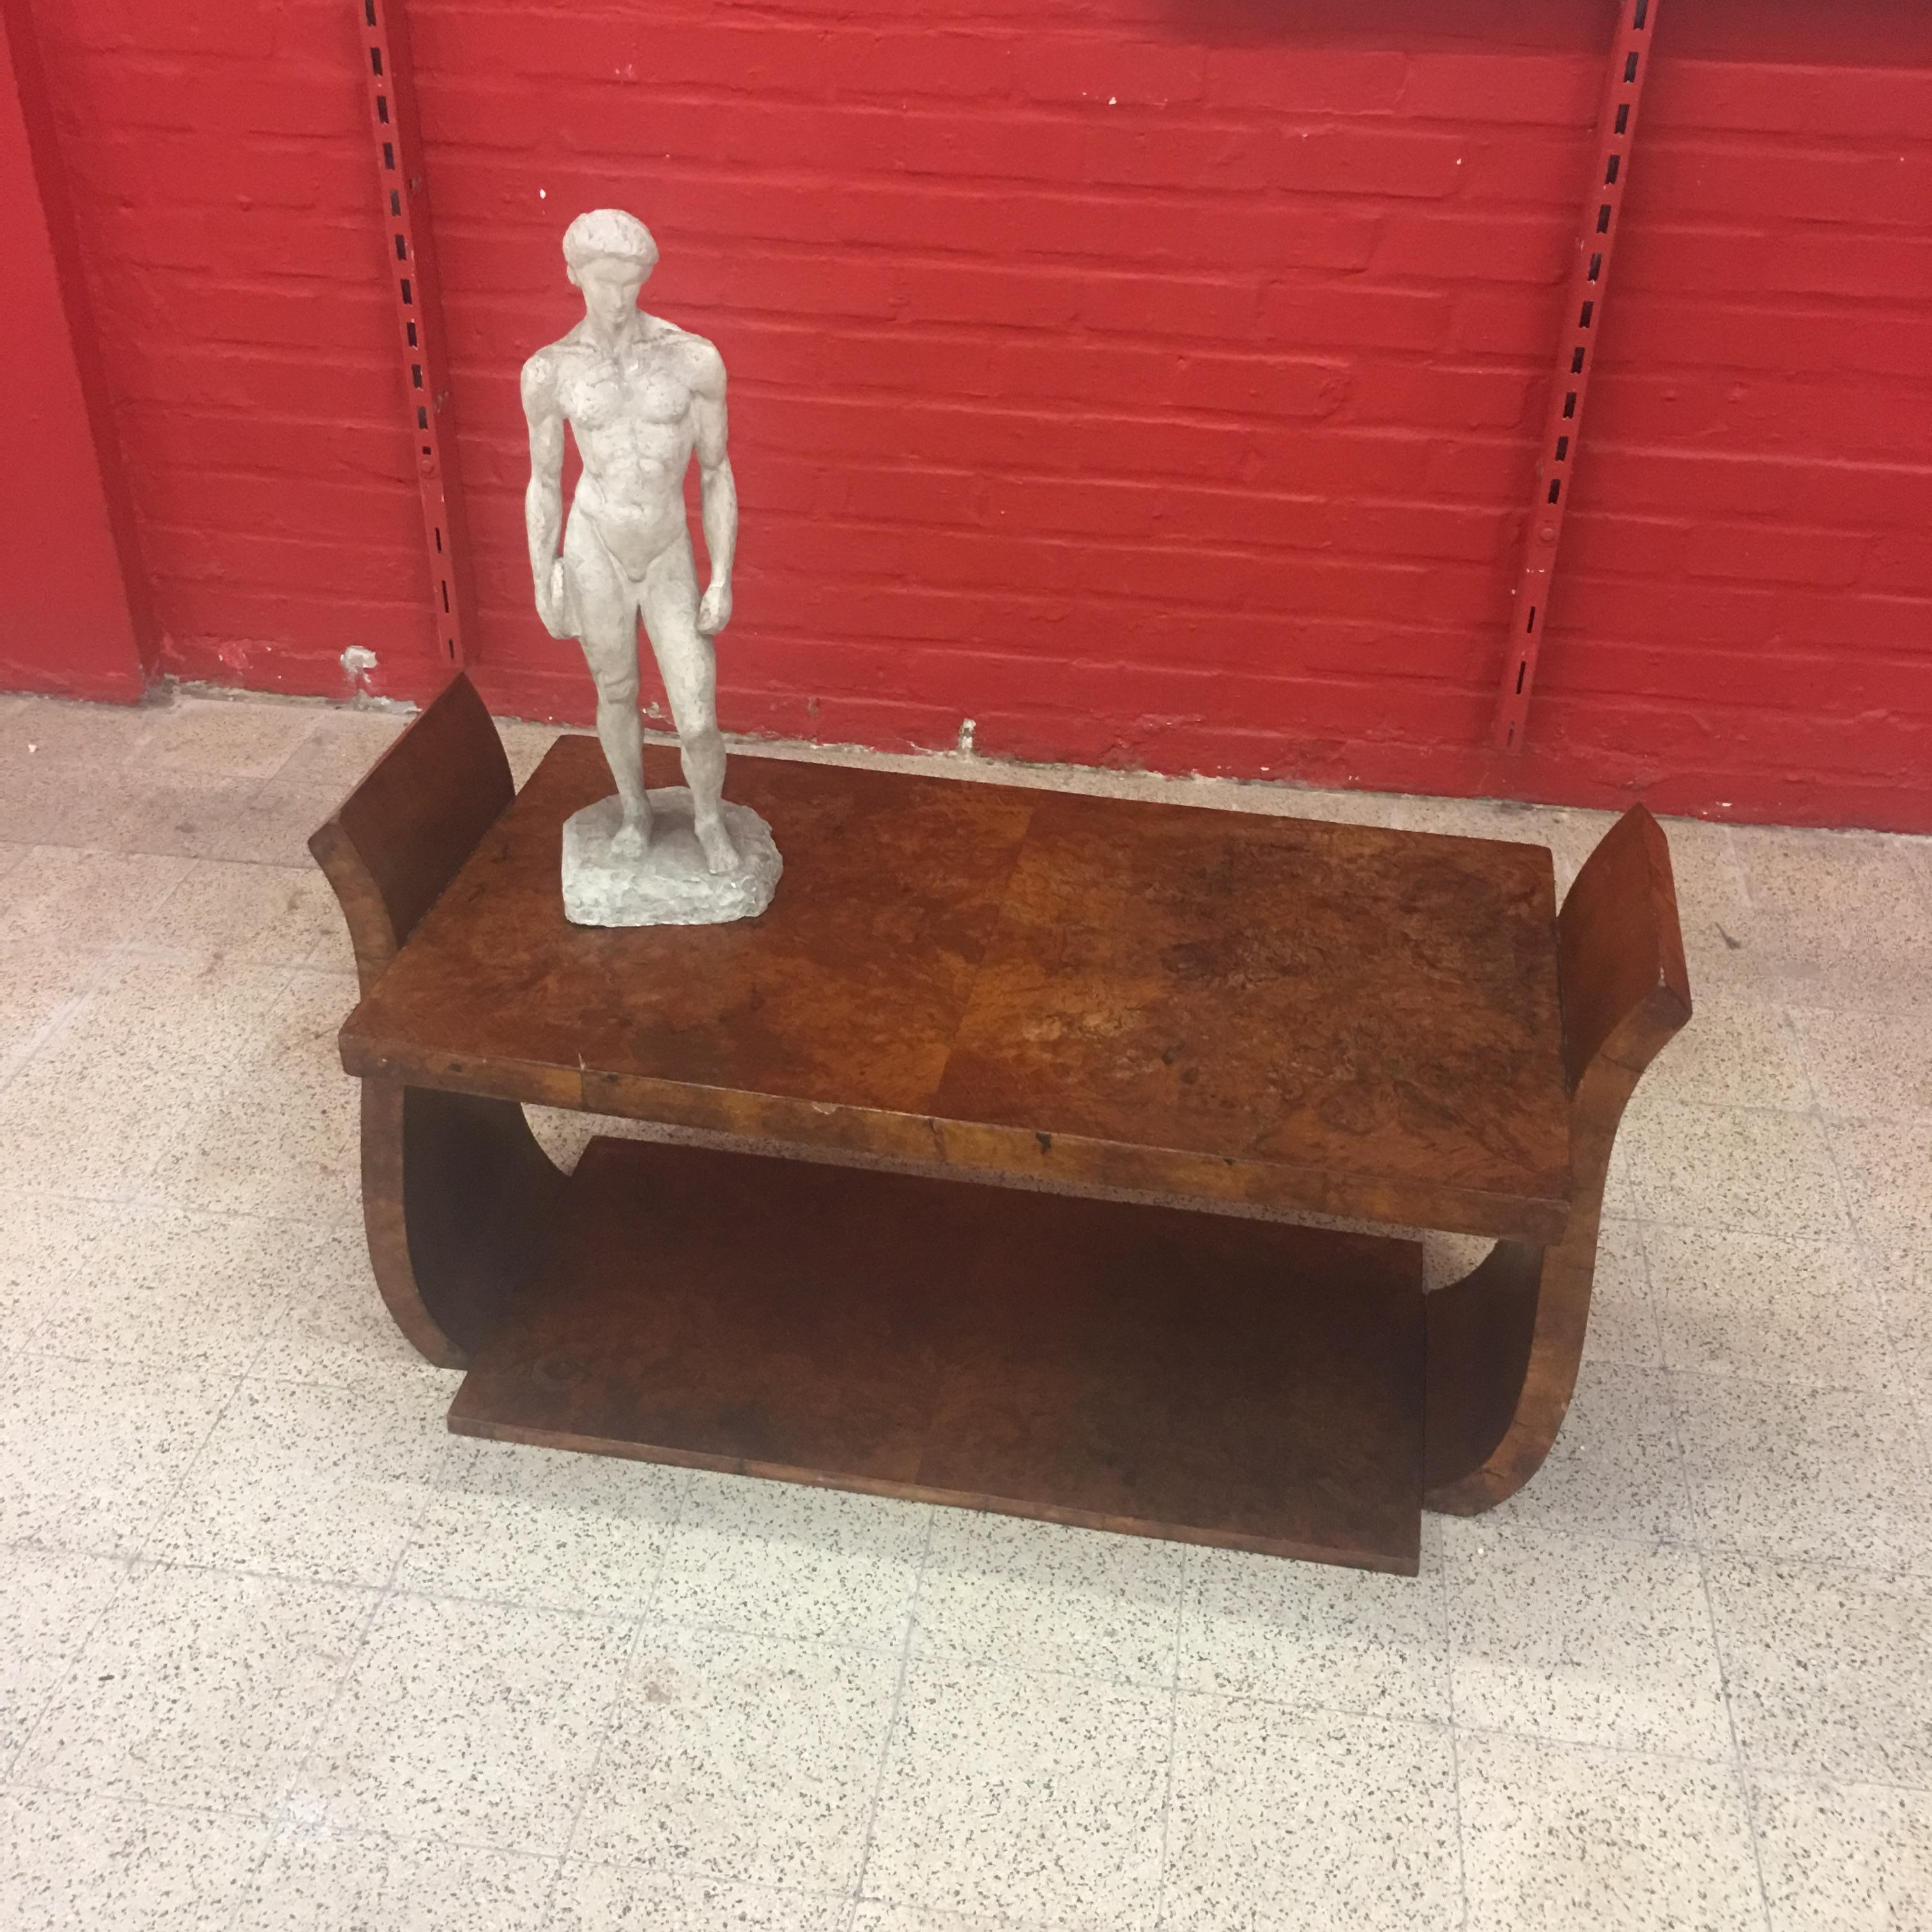 Elegant Art Deco side table in amboyna, circa 1930, to restore.
dimensions of the top: 44x86x47 cm